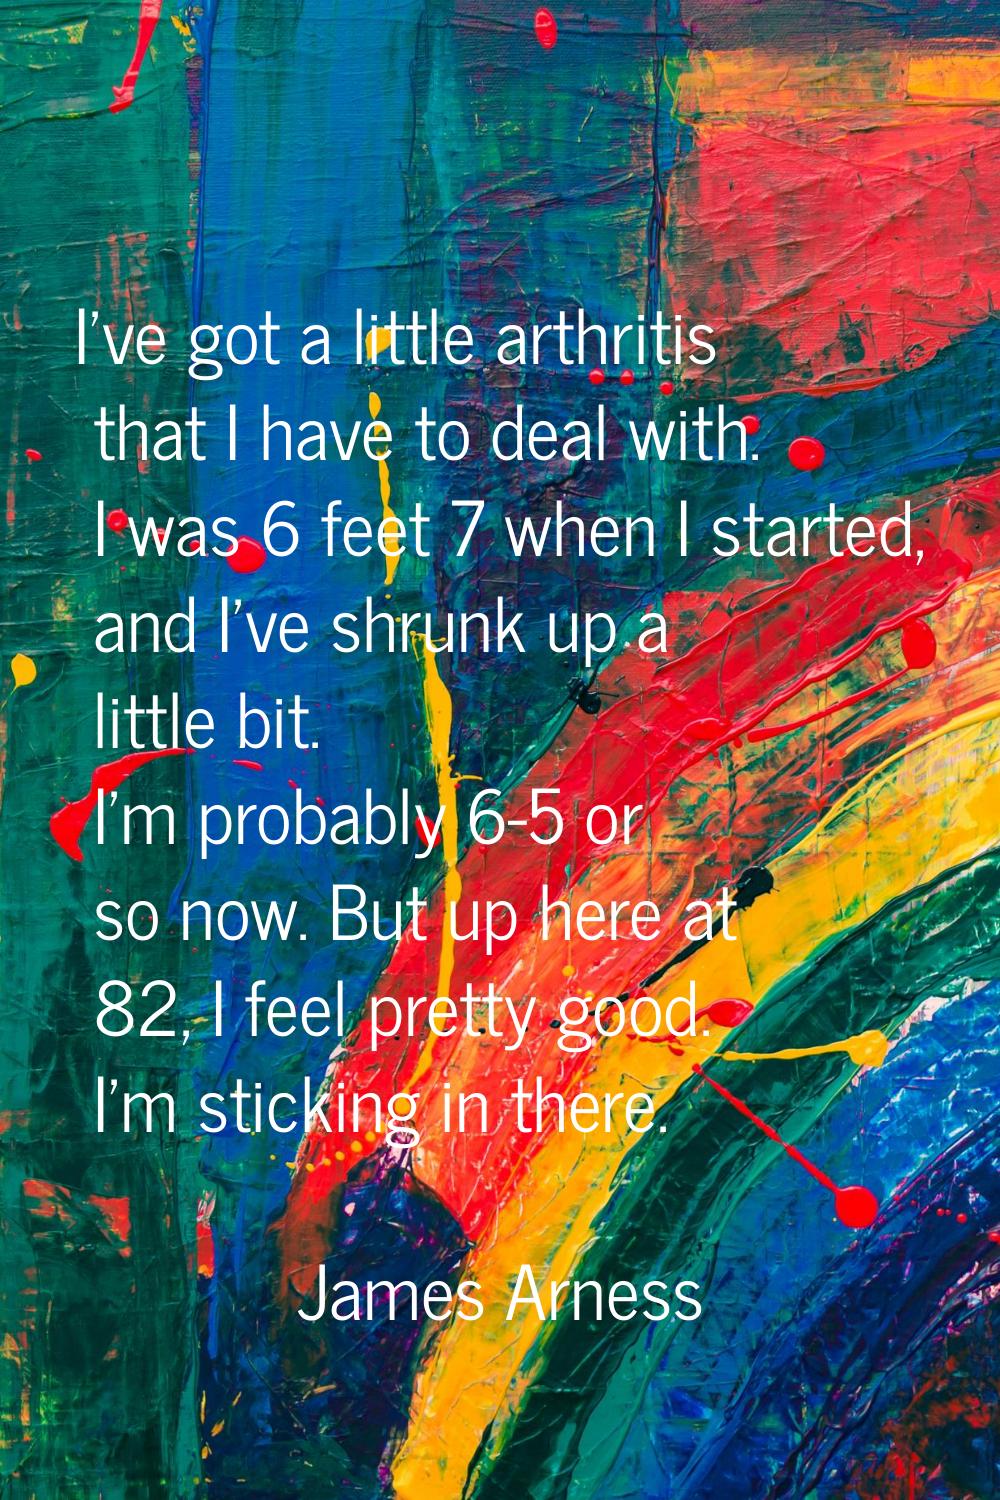 I've got a little arthritis that I have to deal with. I was 6 feet 7 when I started, and I've shrun